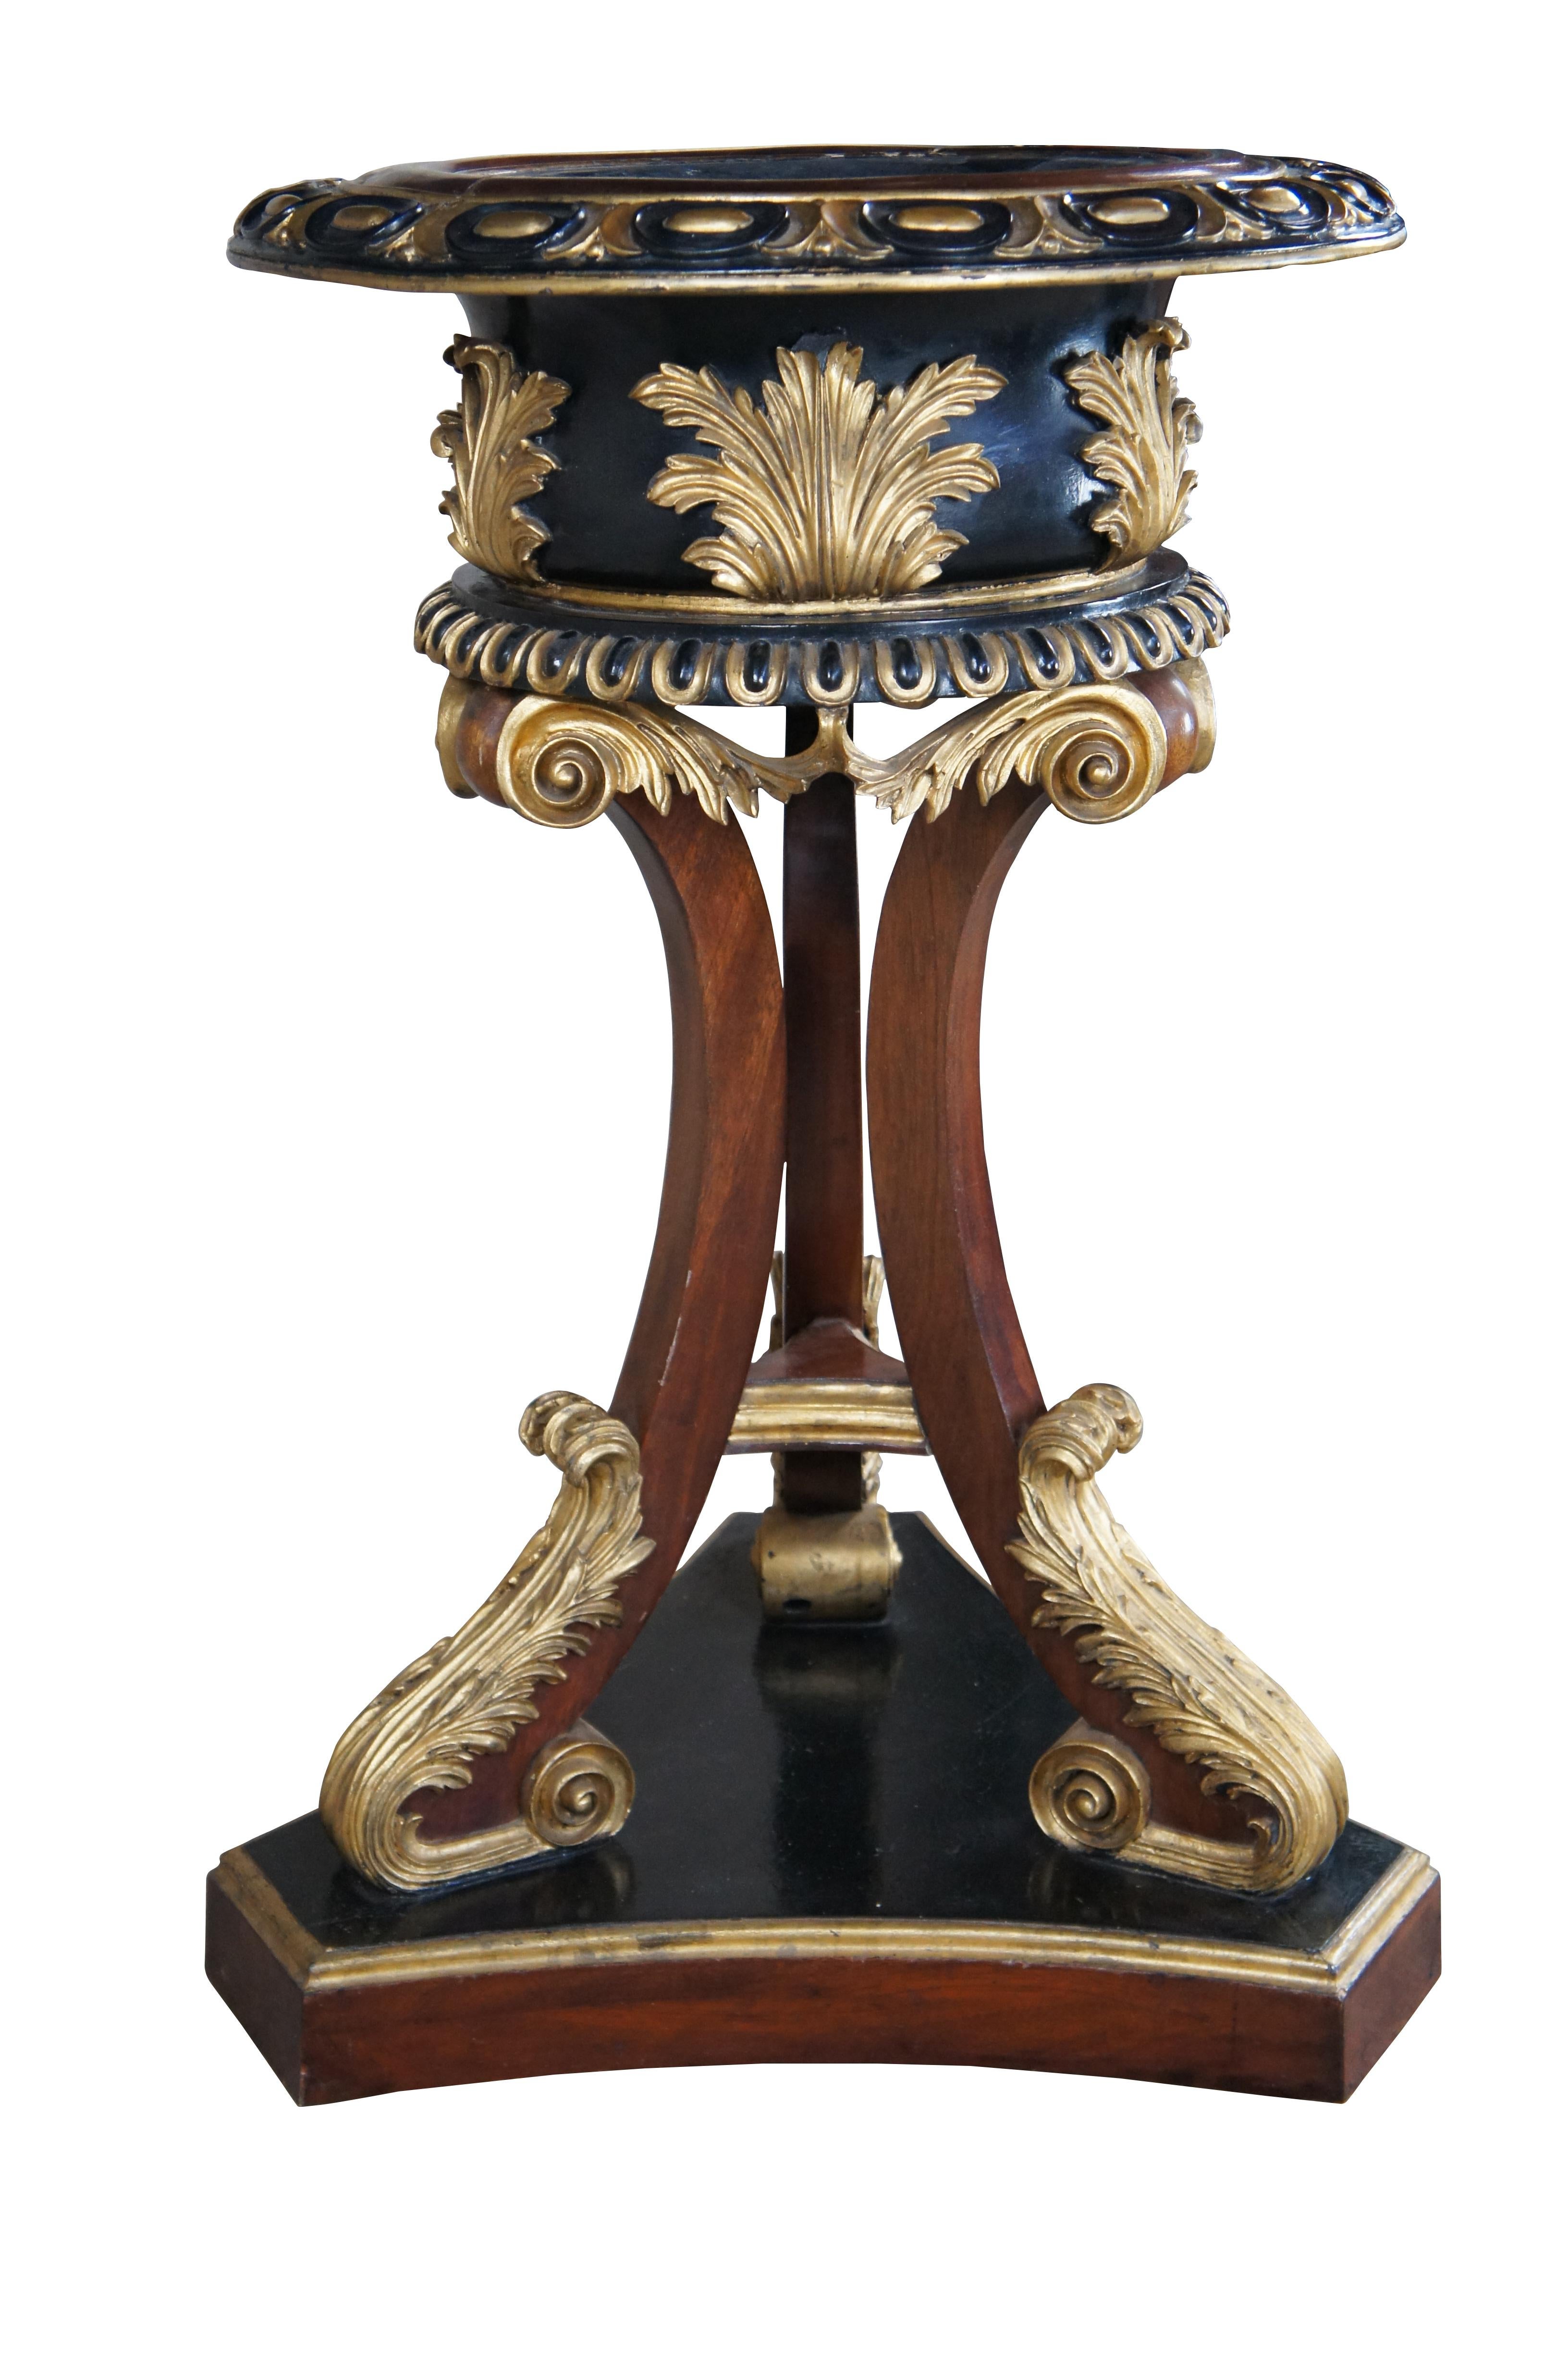 Scottish Regency Parcel Gilt Ebonized Mahogany Jardinière After William Trotter In Good Condition For Sale In Dayton, OH